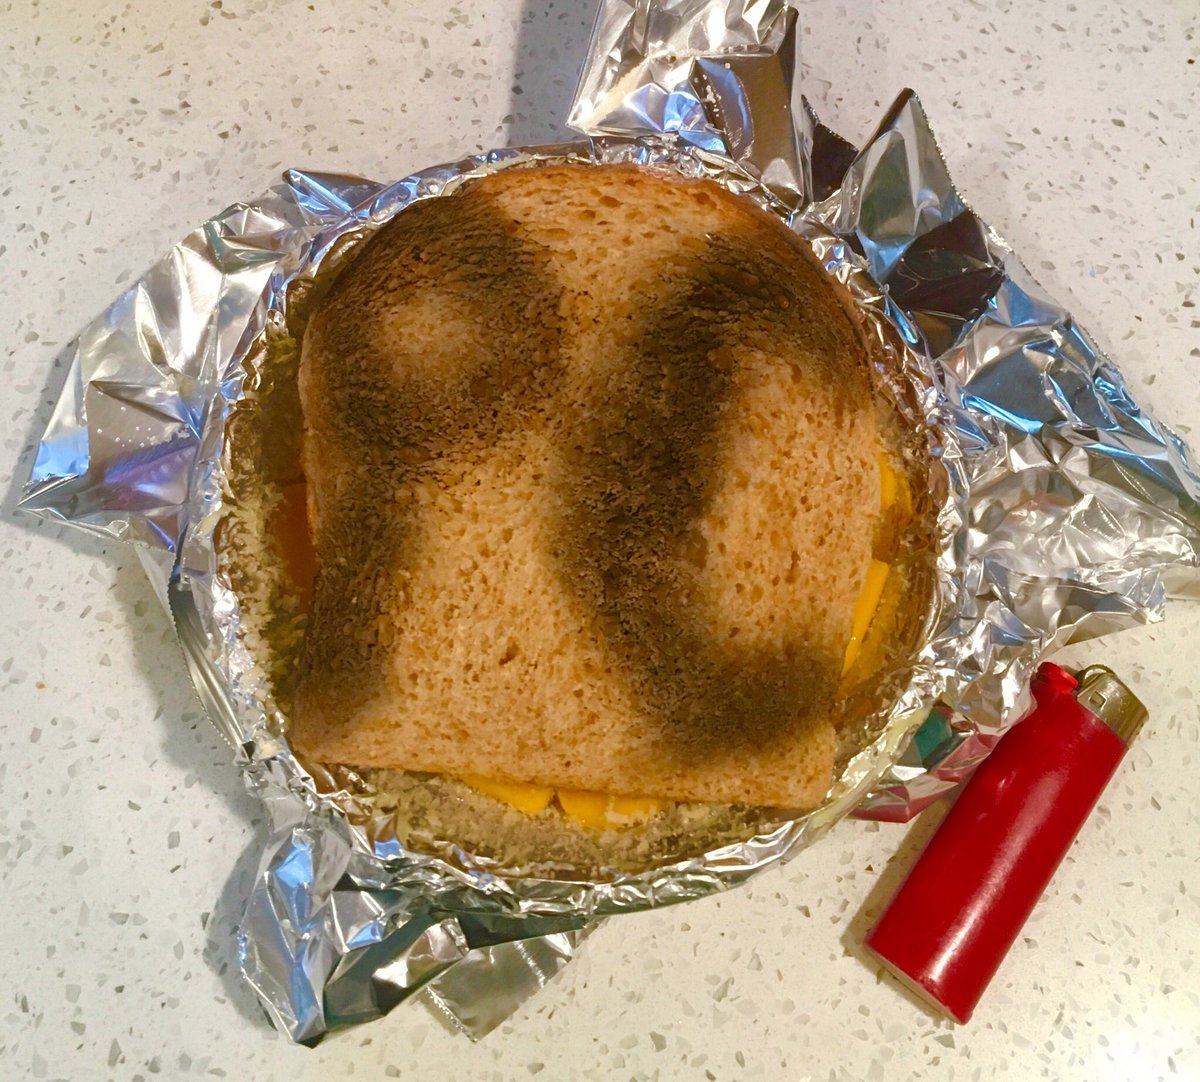 8) oh yeah the most important step! Grab a lighter and brand that shit with PC for Piccolini Cuscino. Little Pillow. RPat used a hamburger bun but I only have bread so. It is what it is.9) question all the life decisions that brought you to this point